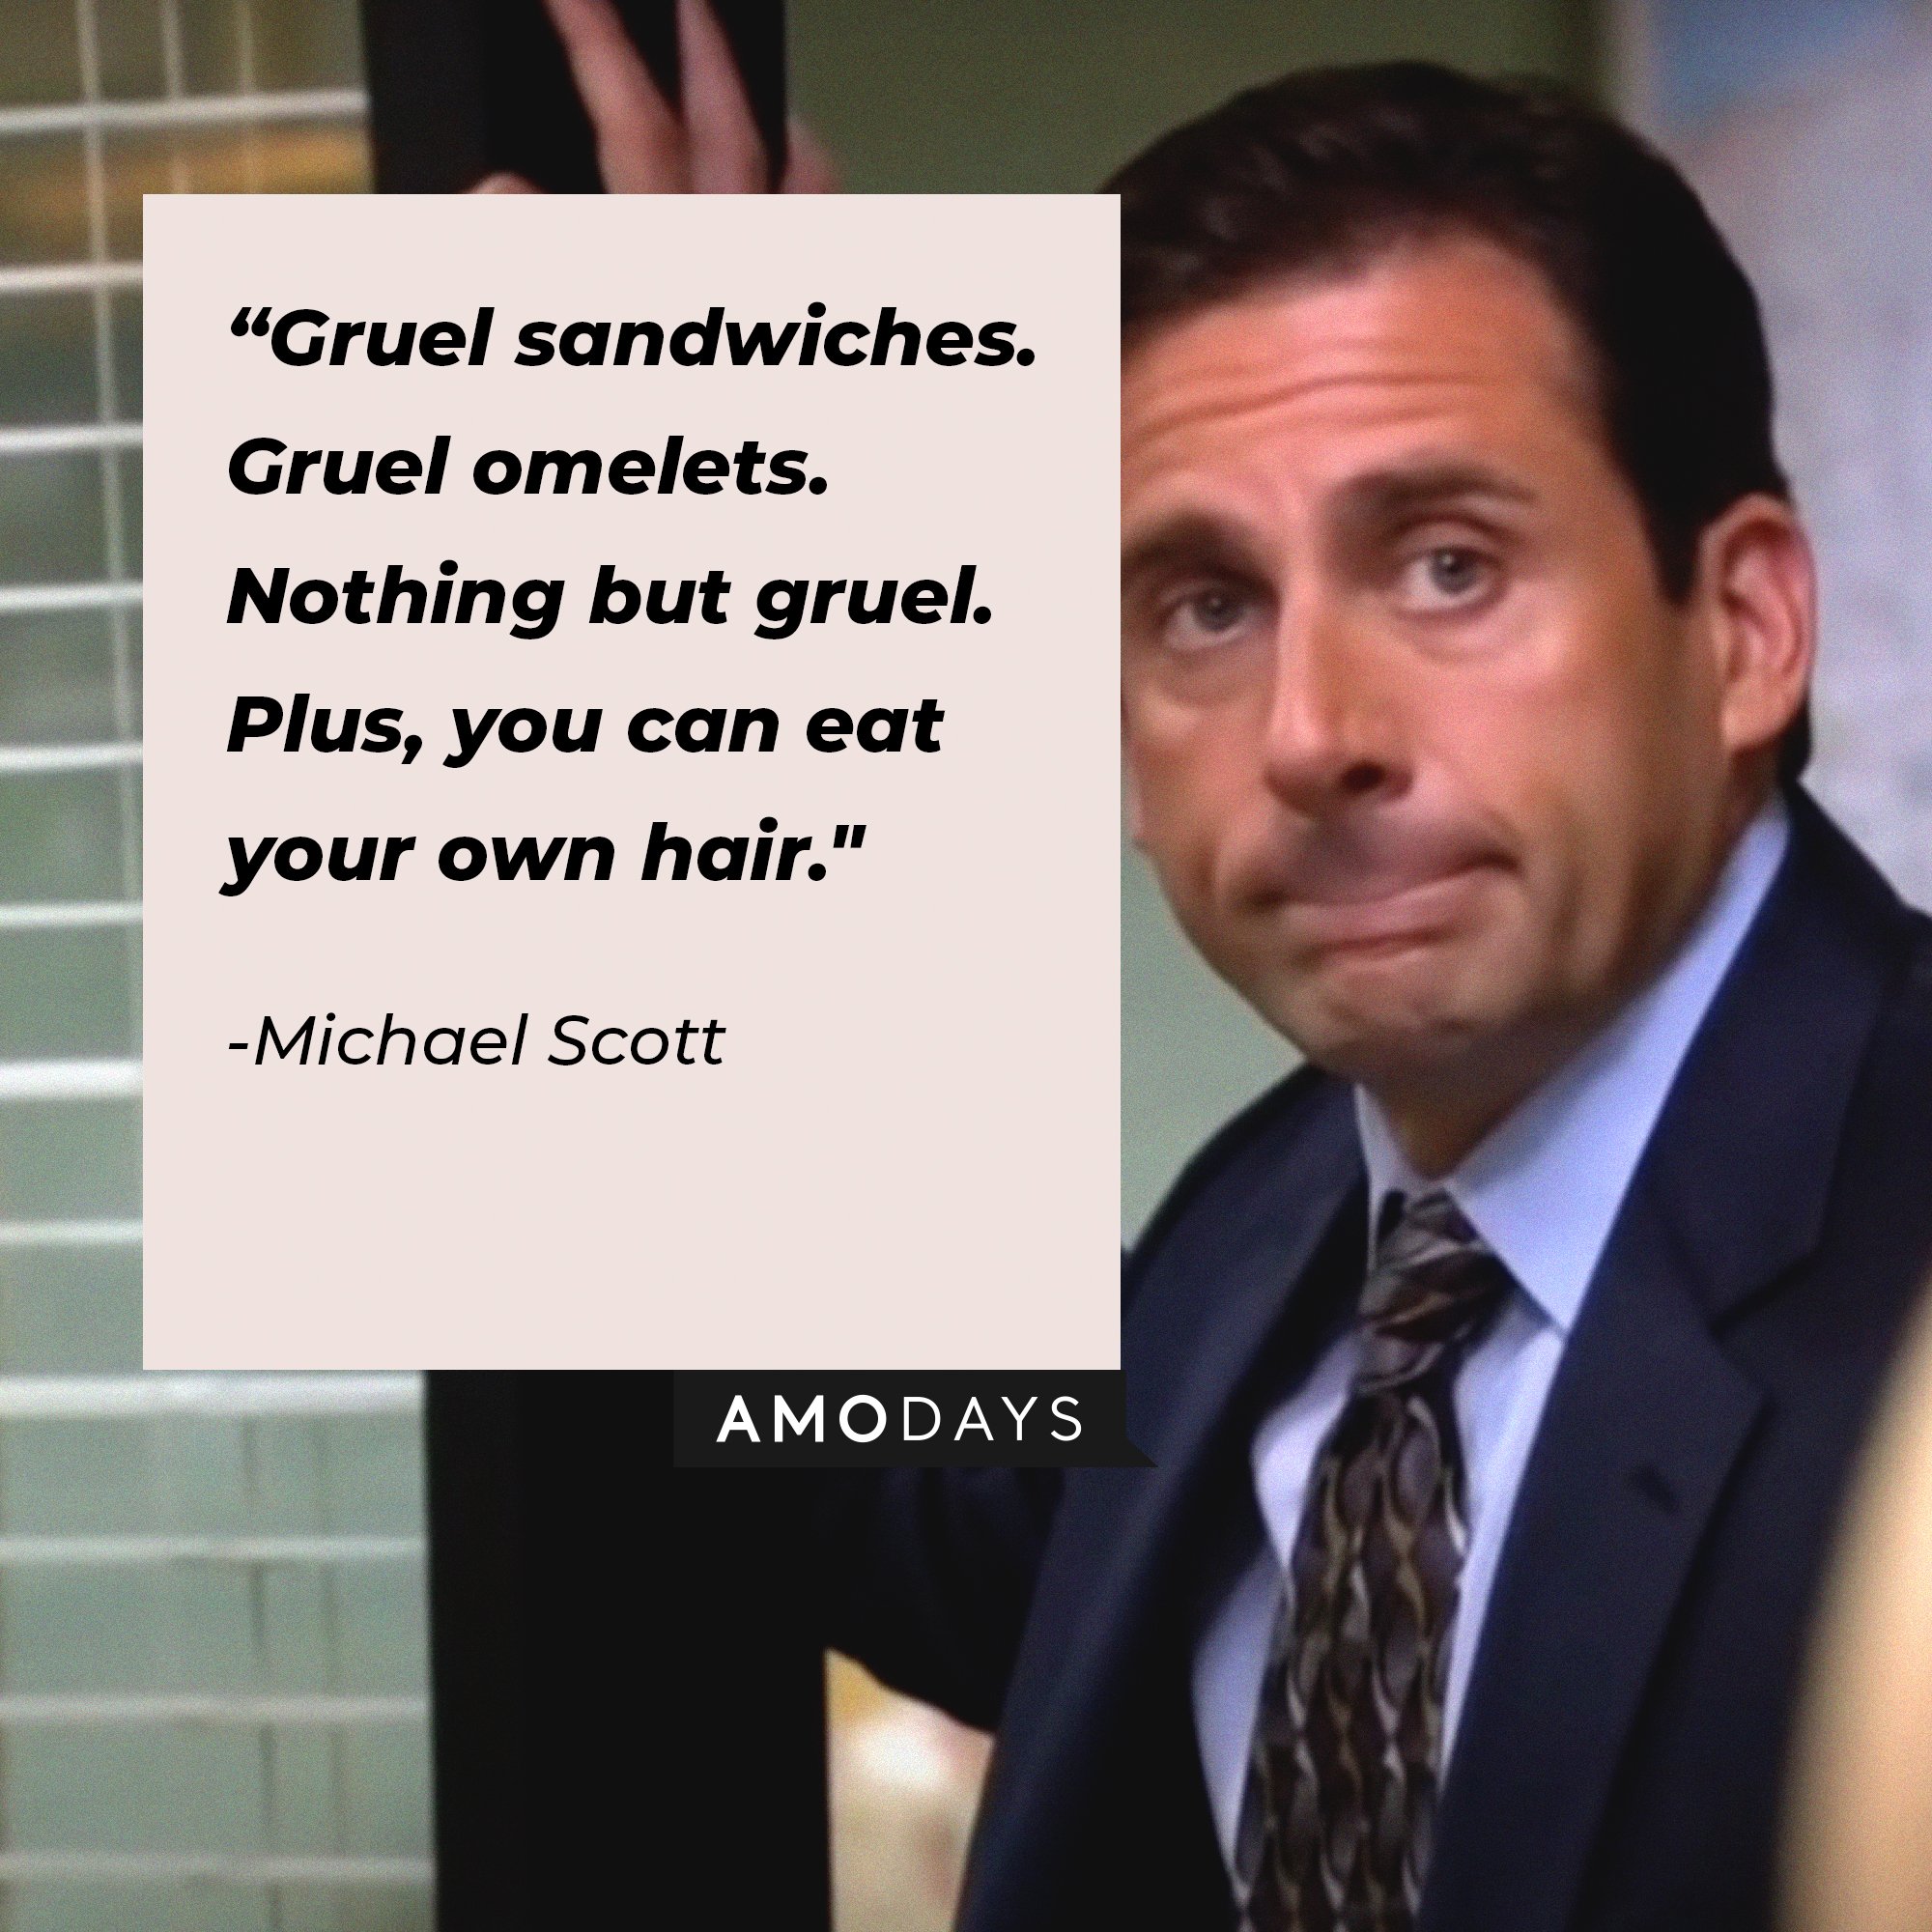 Michael Scott’s quote: "Gruel sandwiches. Gruel omelets. Nothing but gruel. Plus, you can eat your own hair." | Image: AmoDays